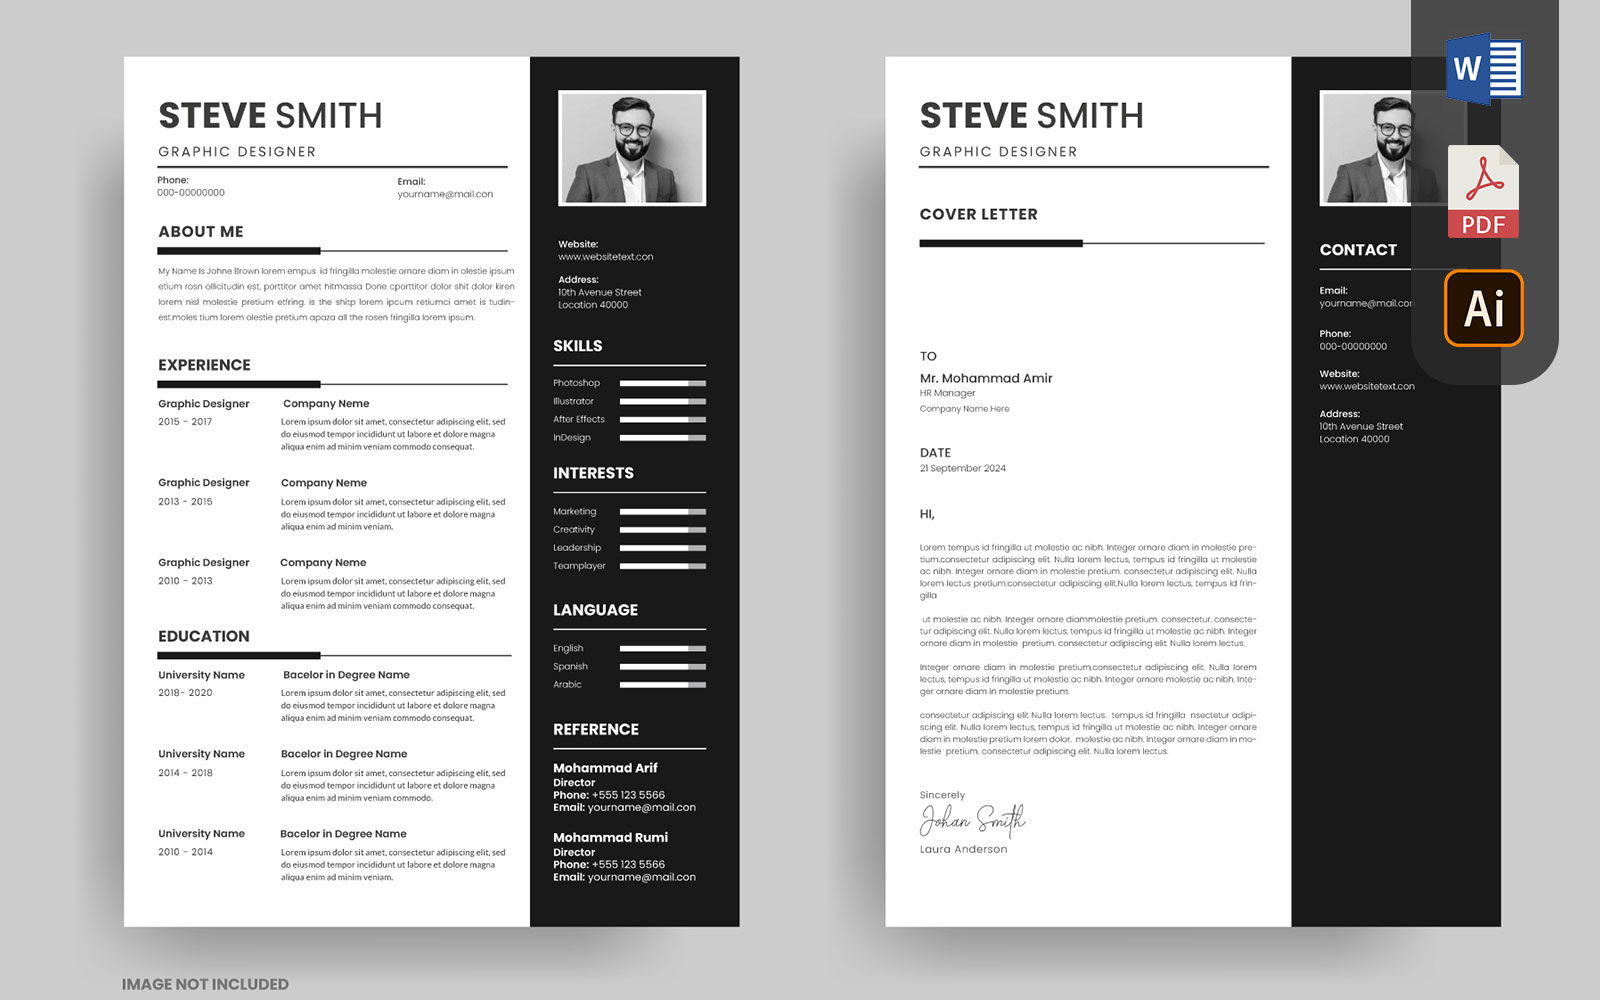 Clean CV Resume Template or Cover Letter Design